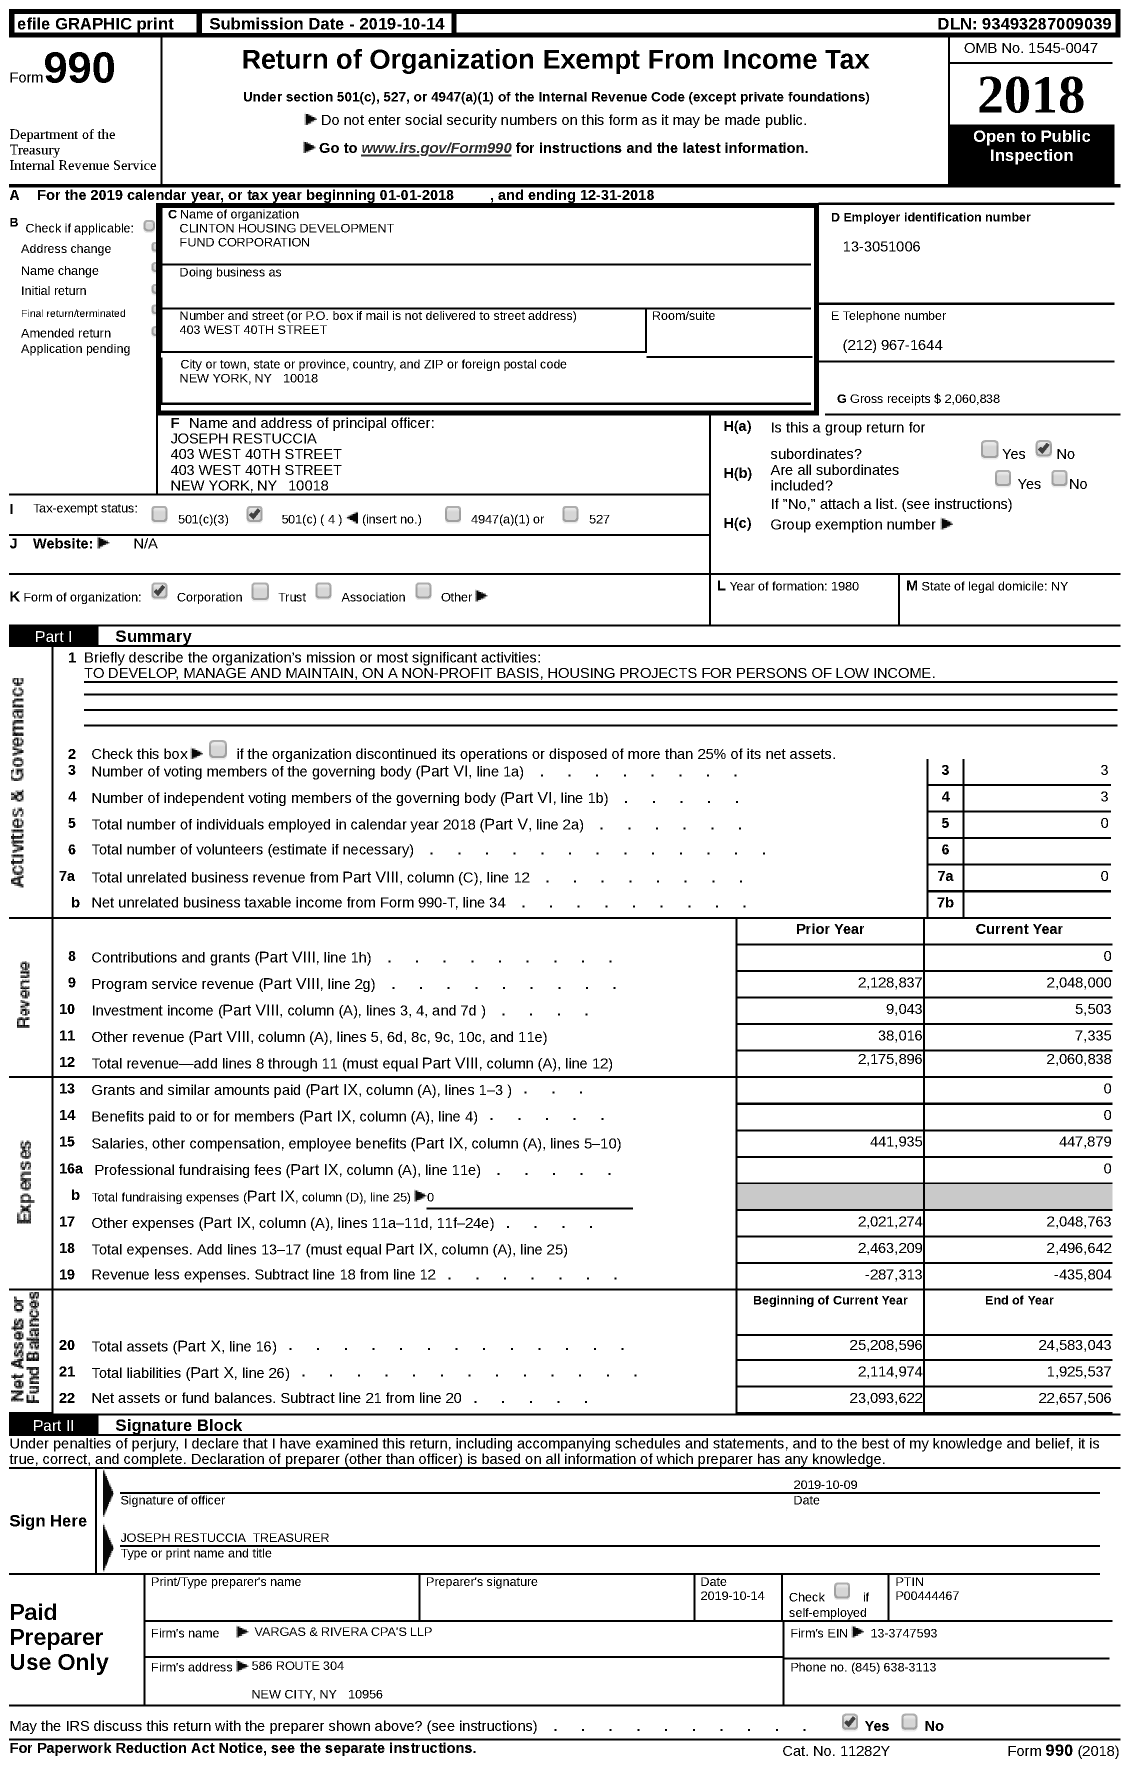 Image of first page of 2018 Form 990 for Clinton Housing Development Fund Corporation (CHDC)